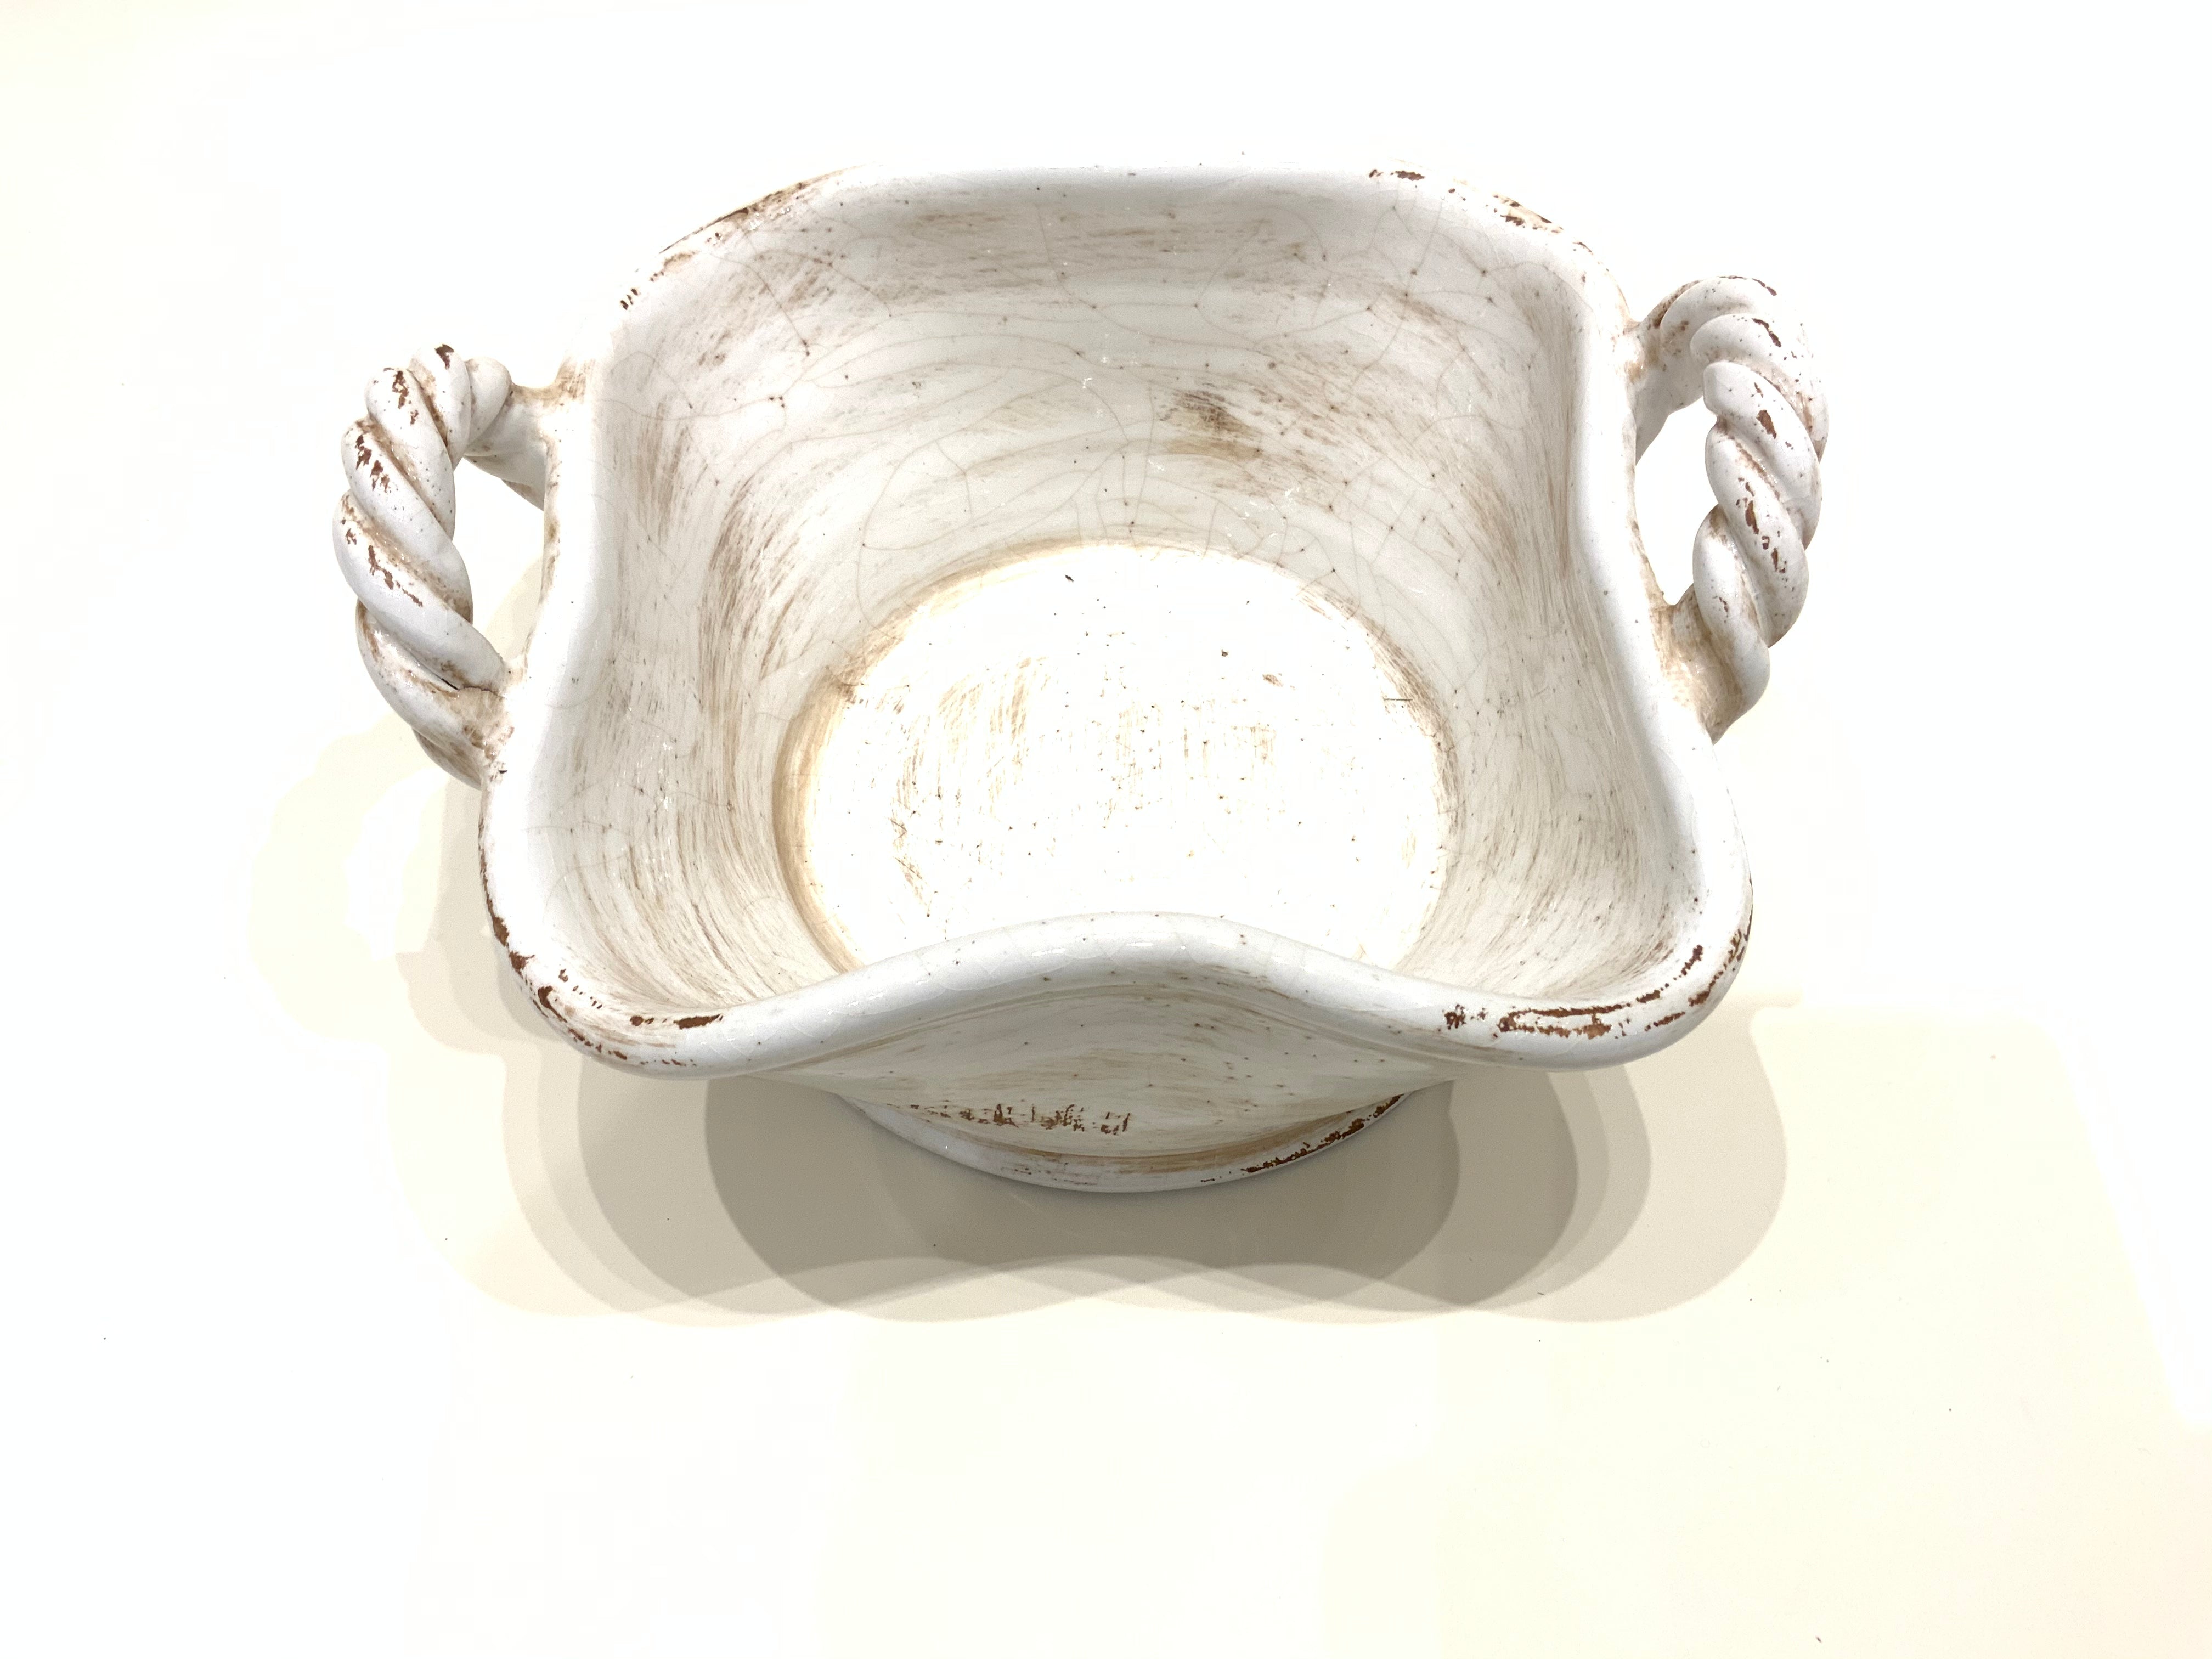 Rustic White Glazed Bowl with Twisted Handles